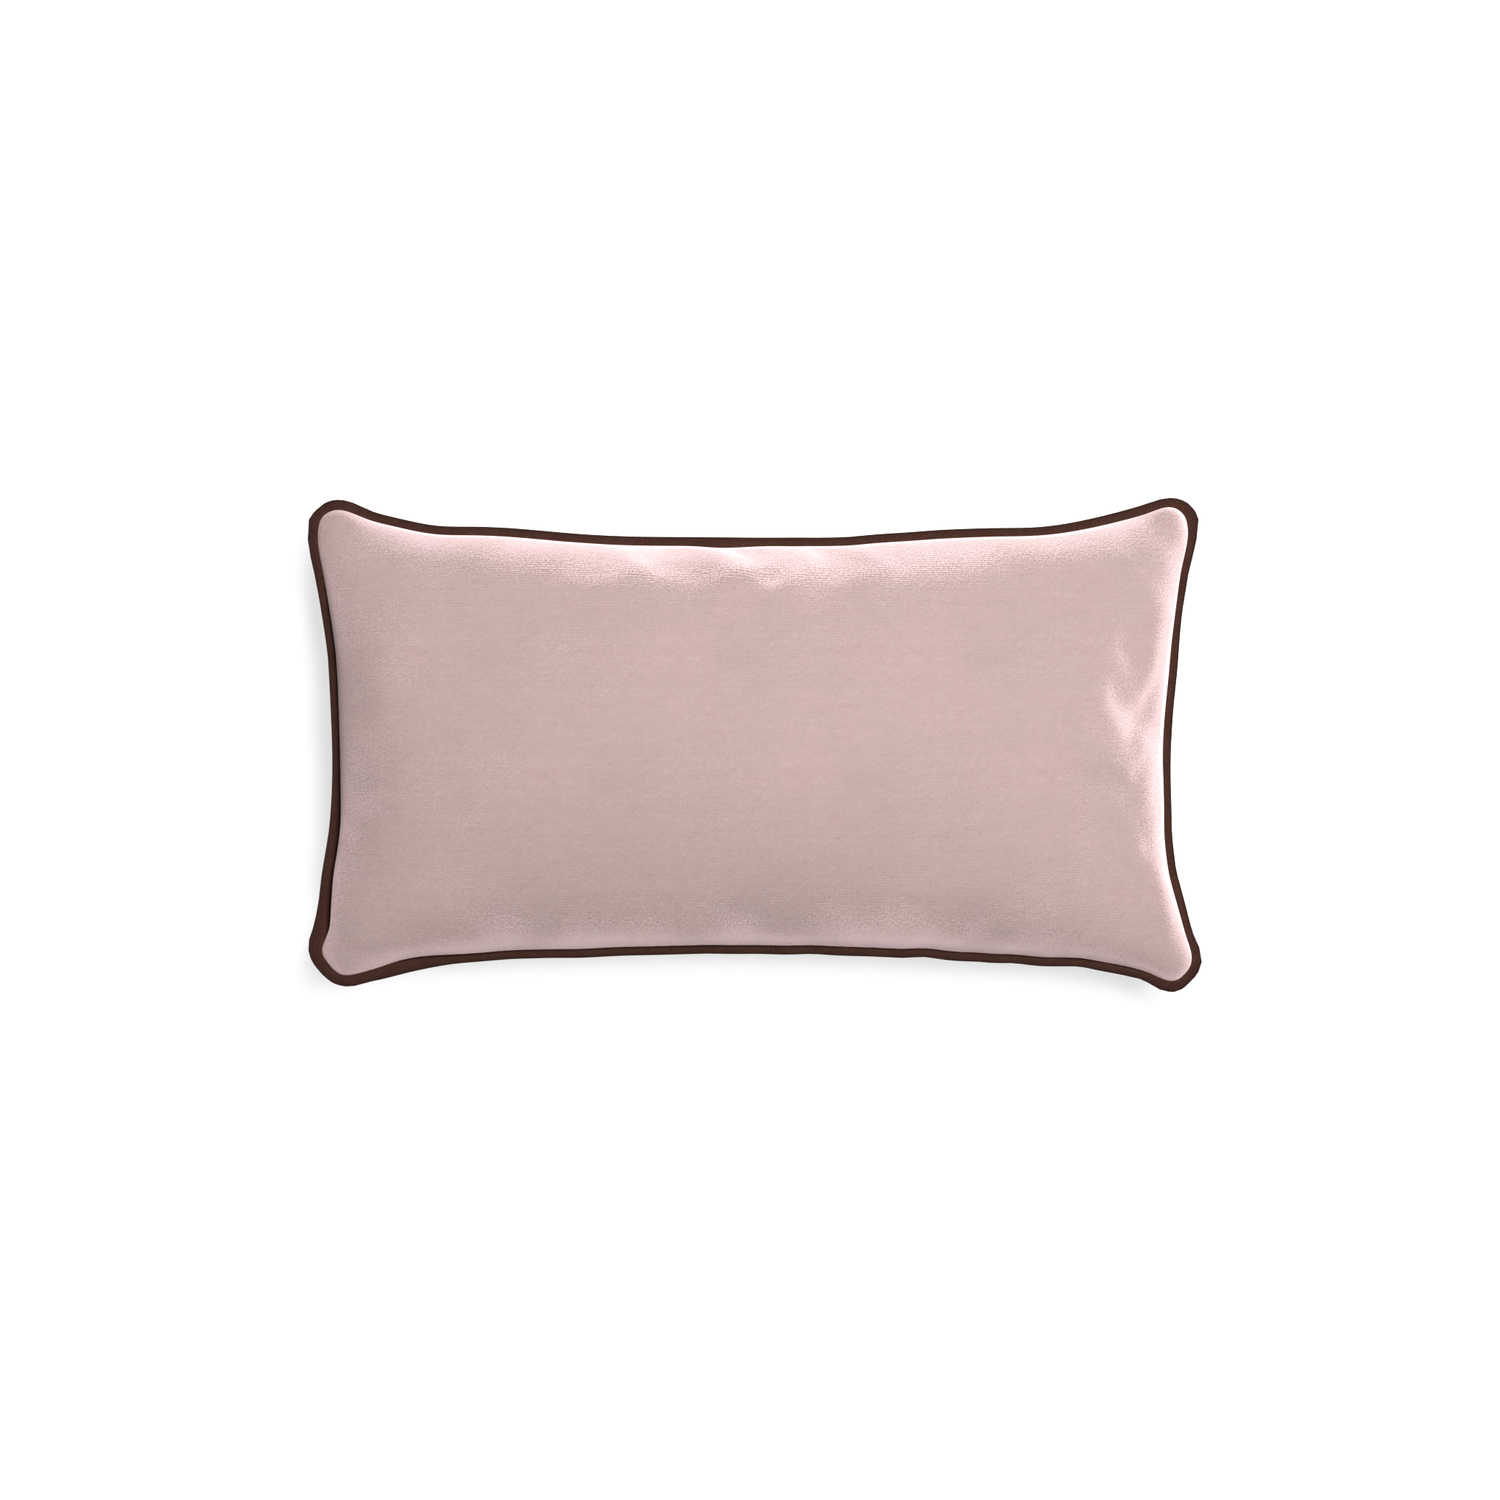 rectangle light pink velvet pillow with brown piping 